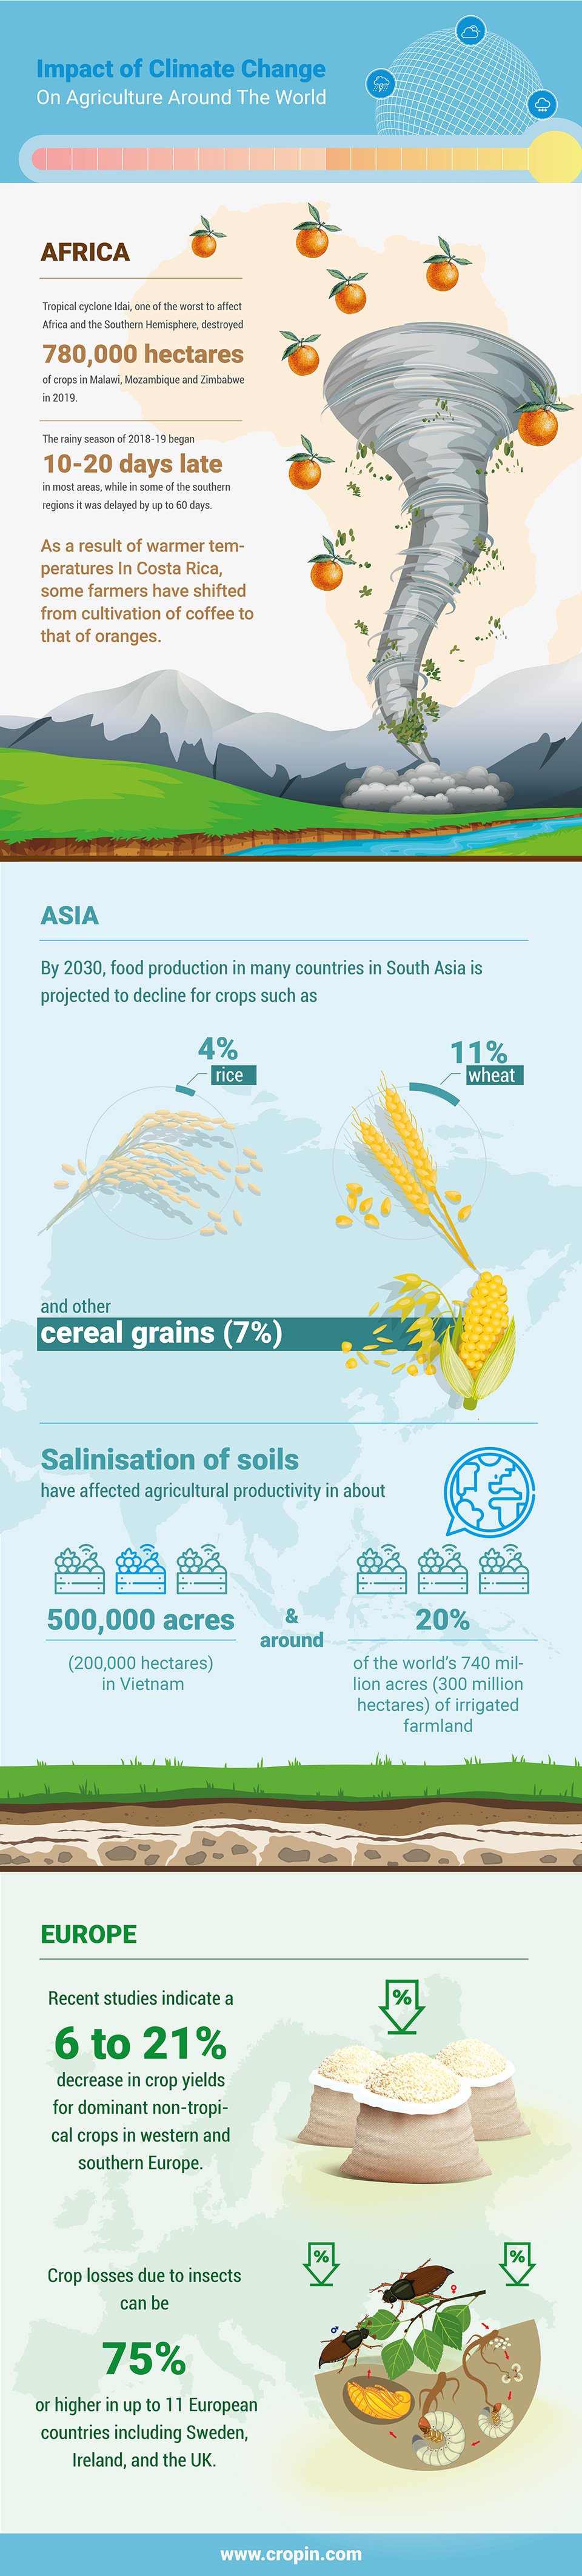 impact of climate change on agriculture around the world